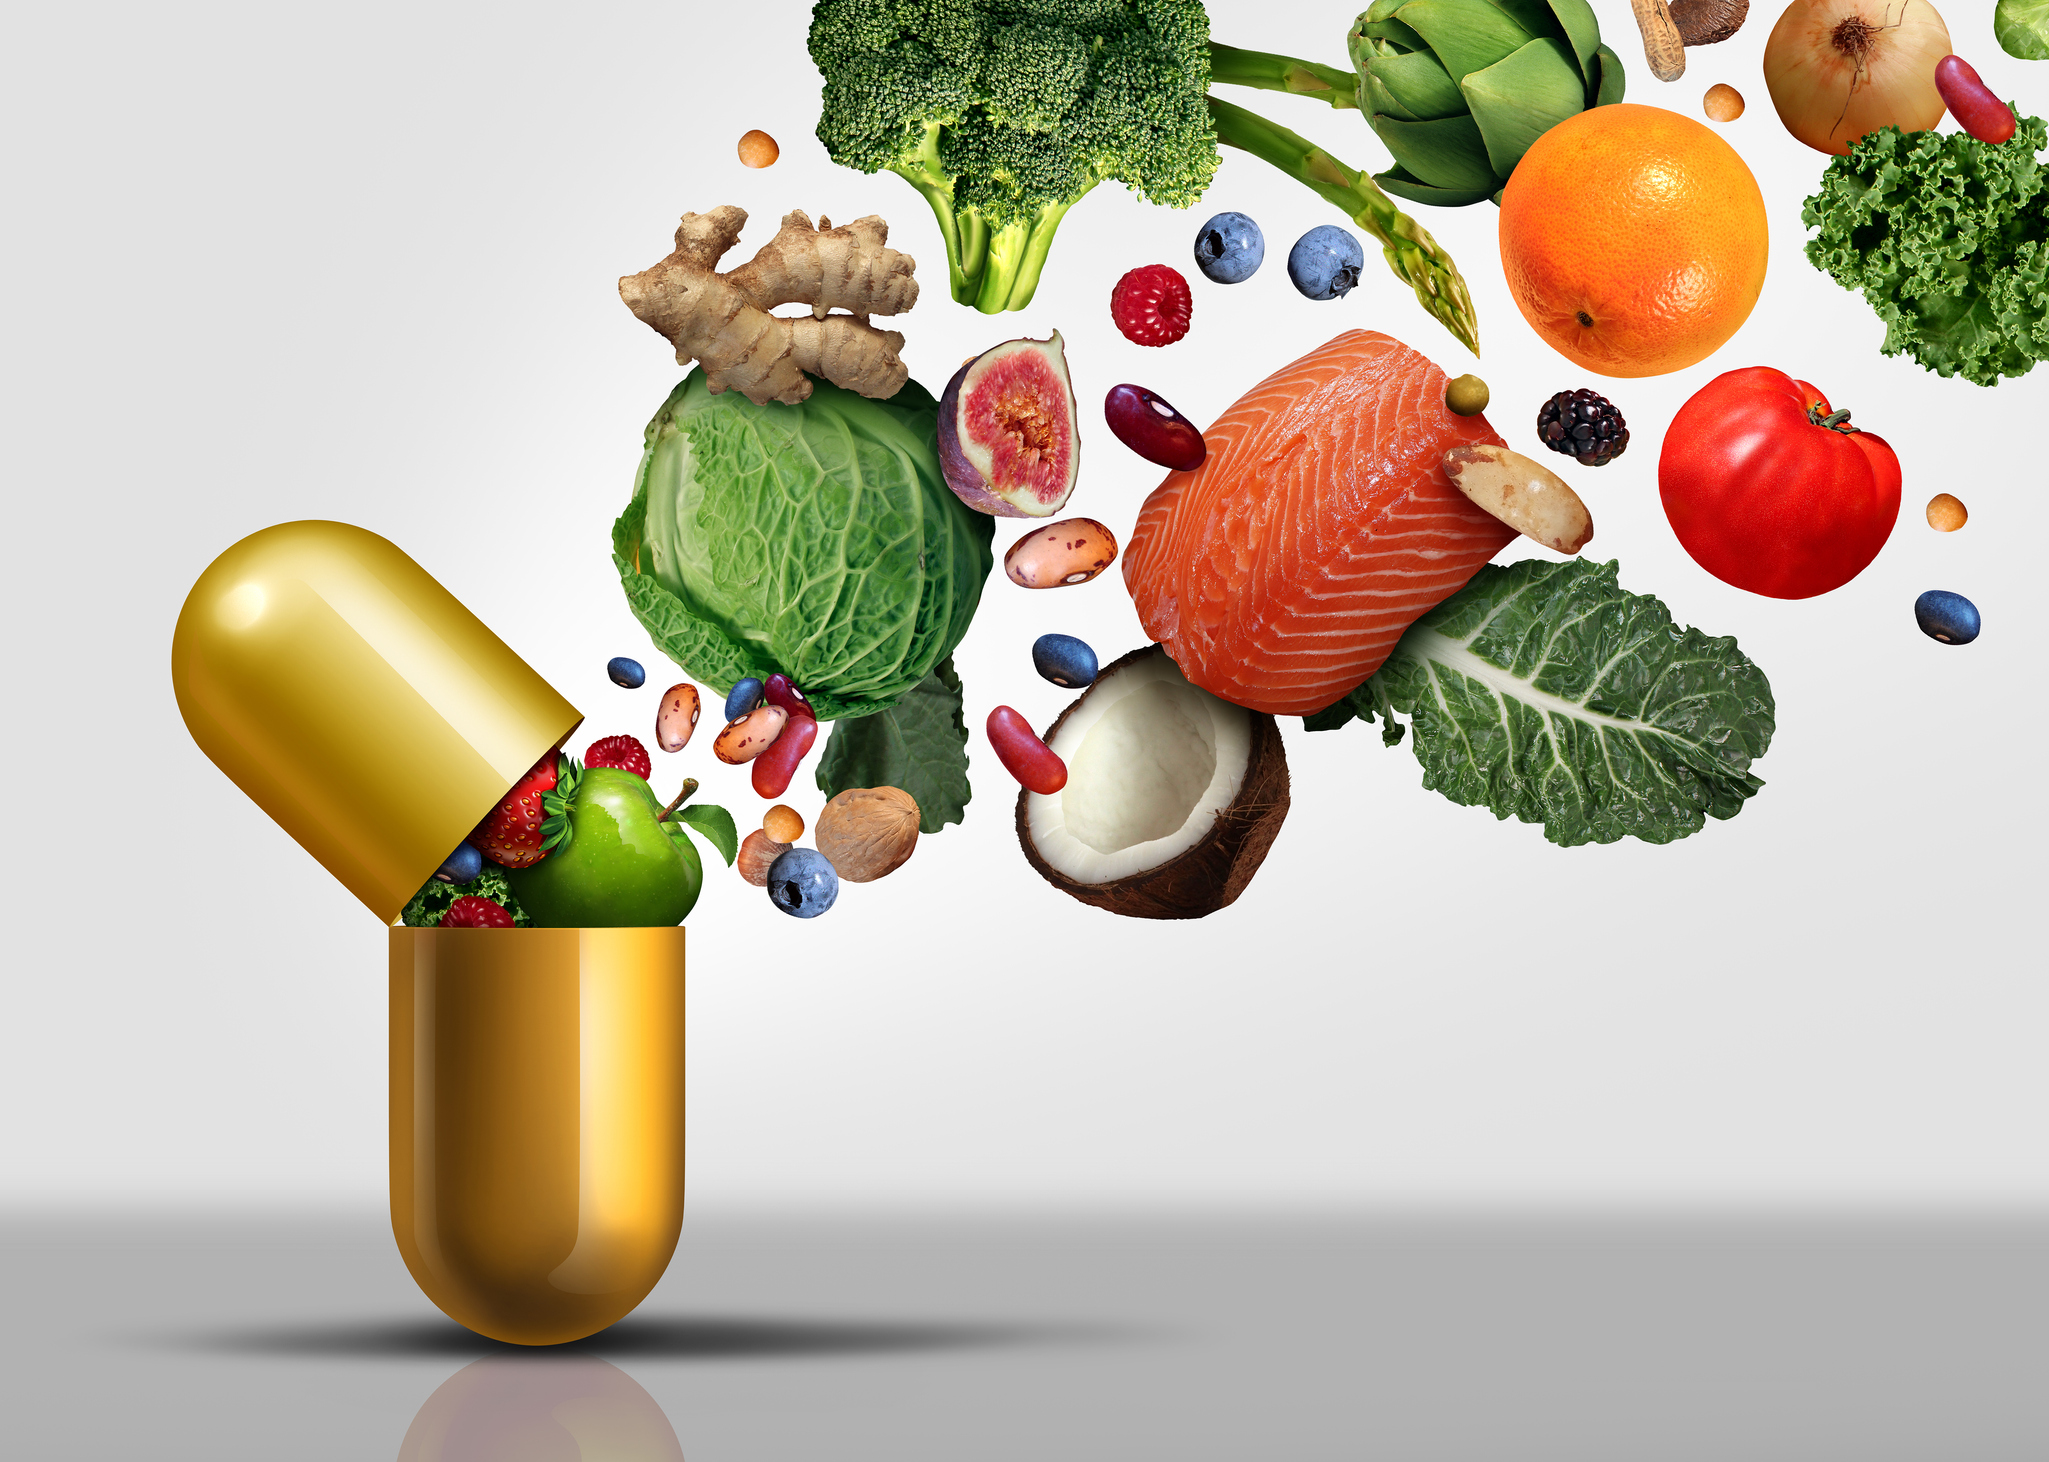 Choosing a Multivitamin: How Do I Know Which Vitamins to Take?